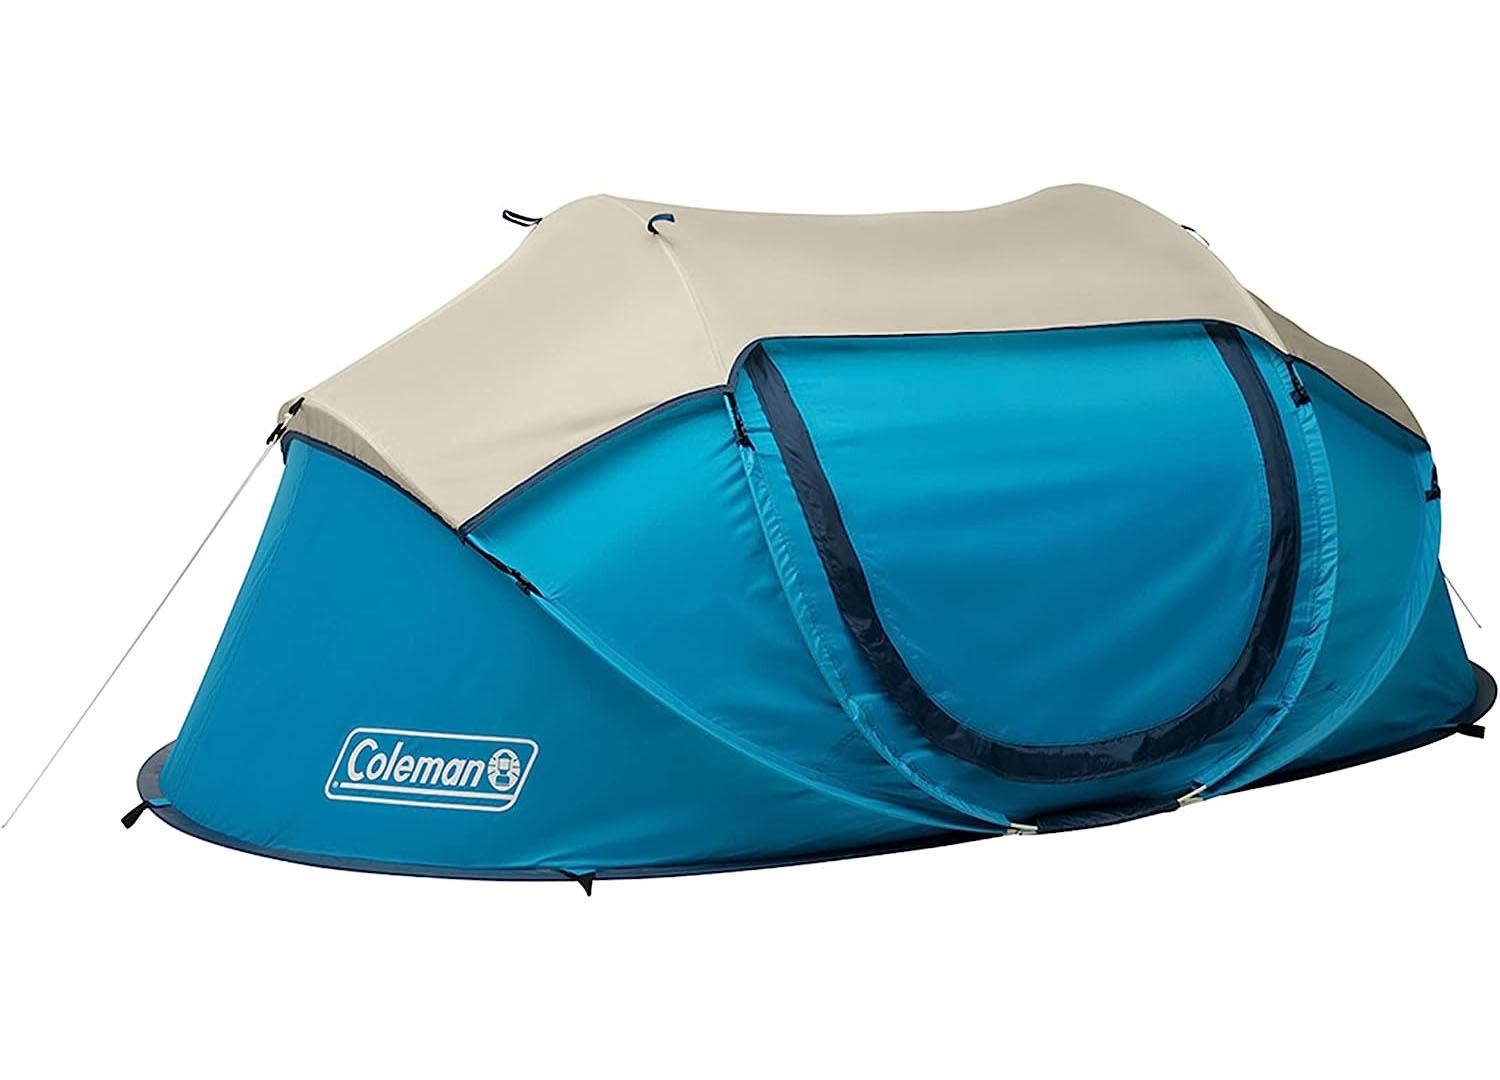 Coleman 2 to 4 People Pop-Up Camping Tent for $49.99 Shipped